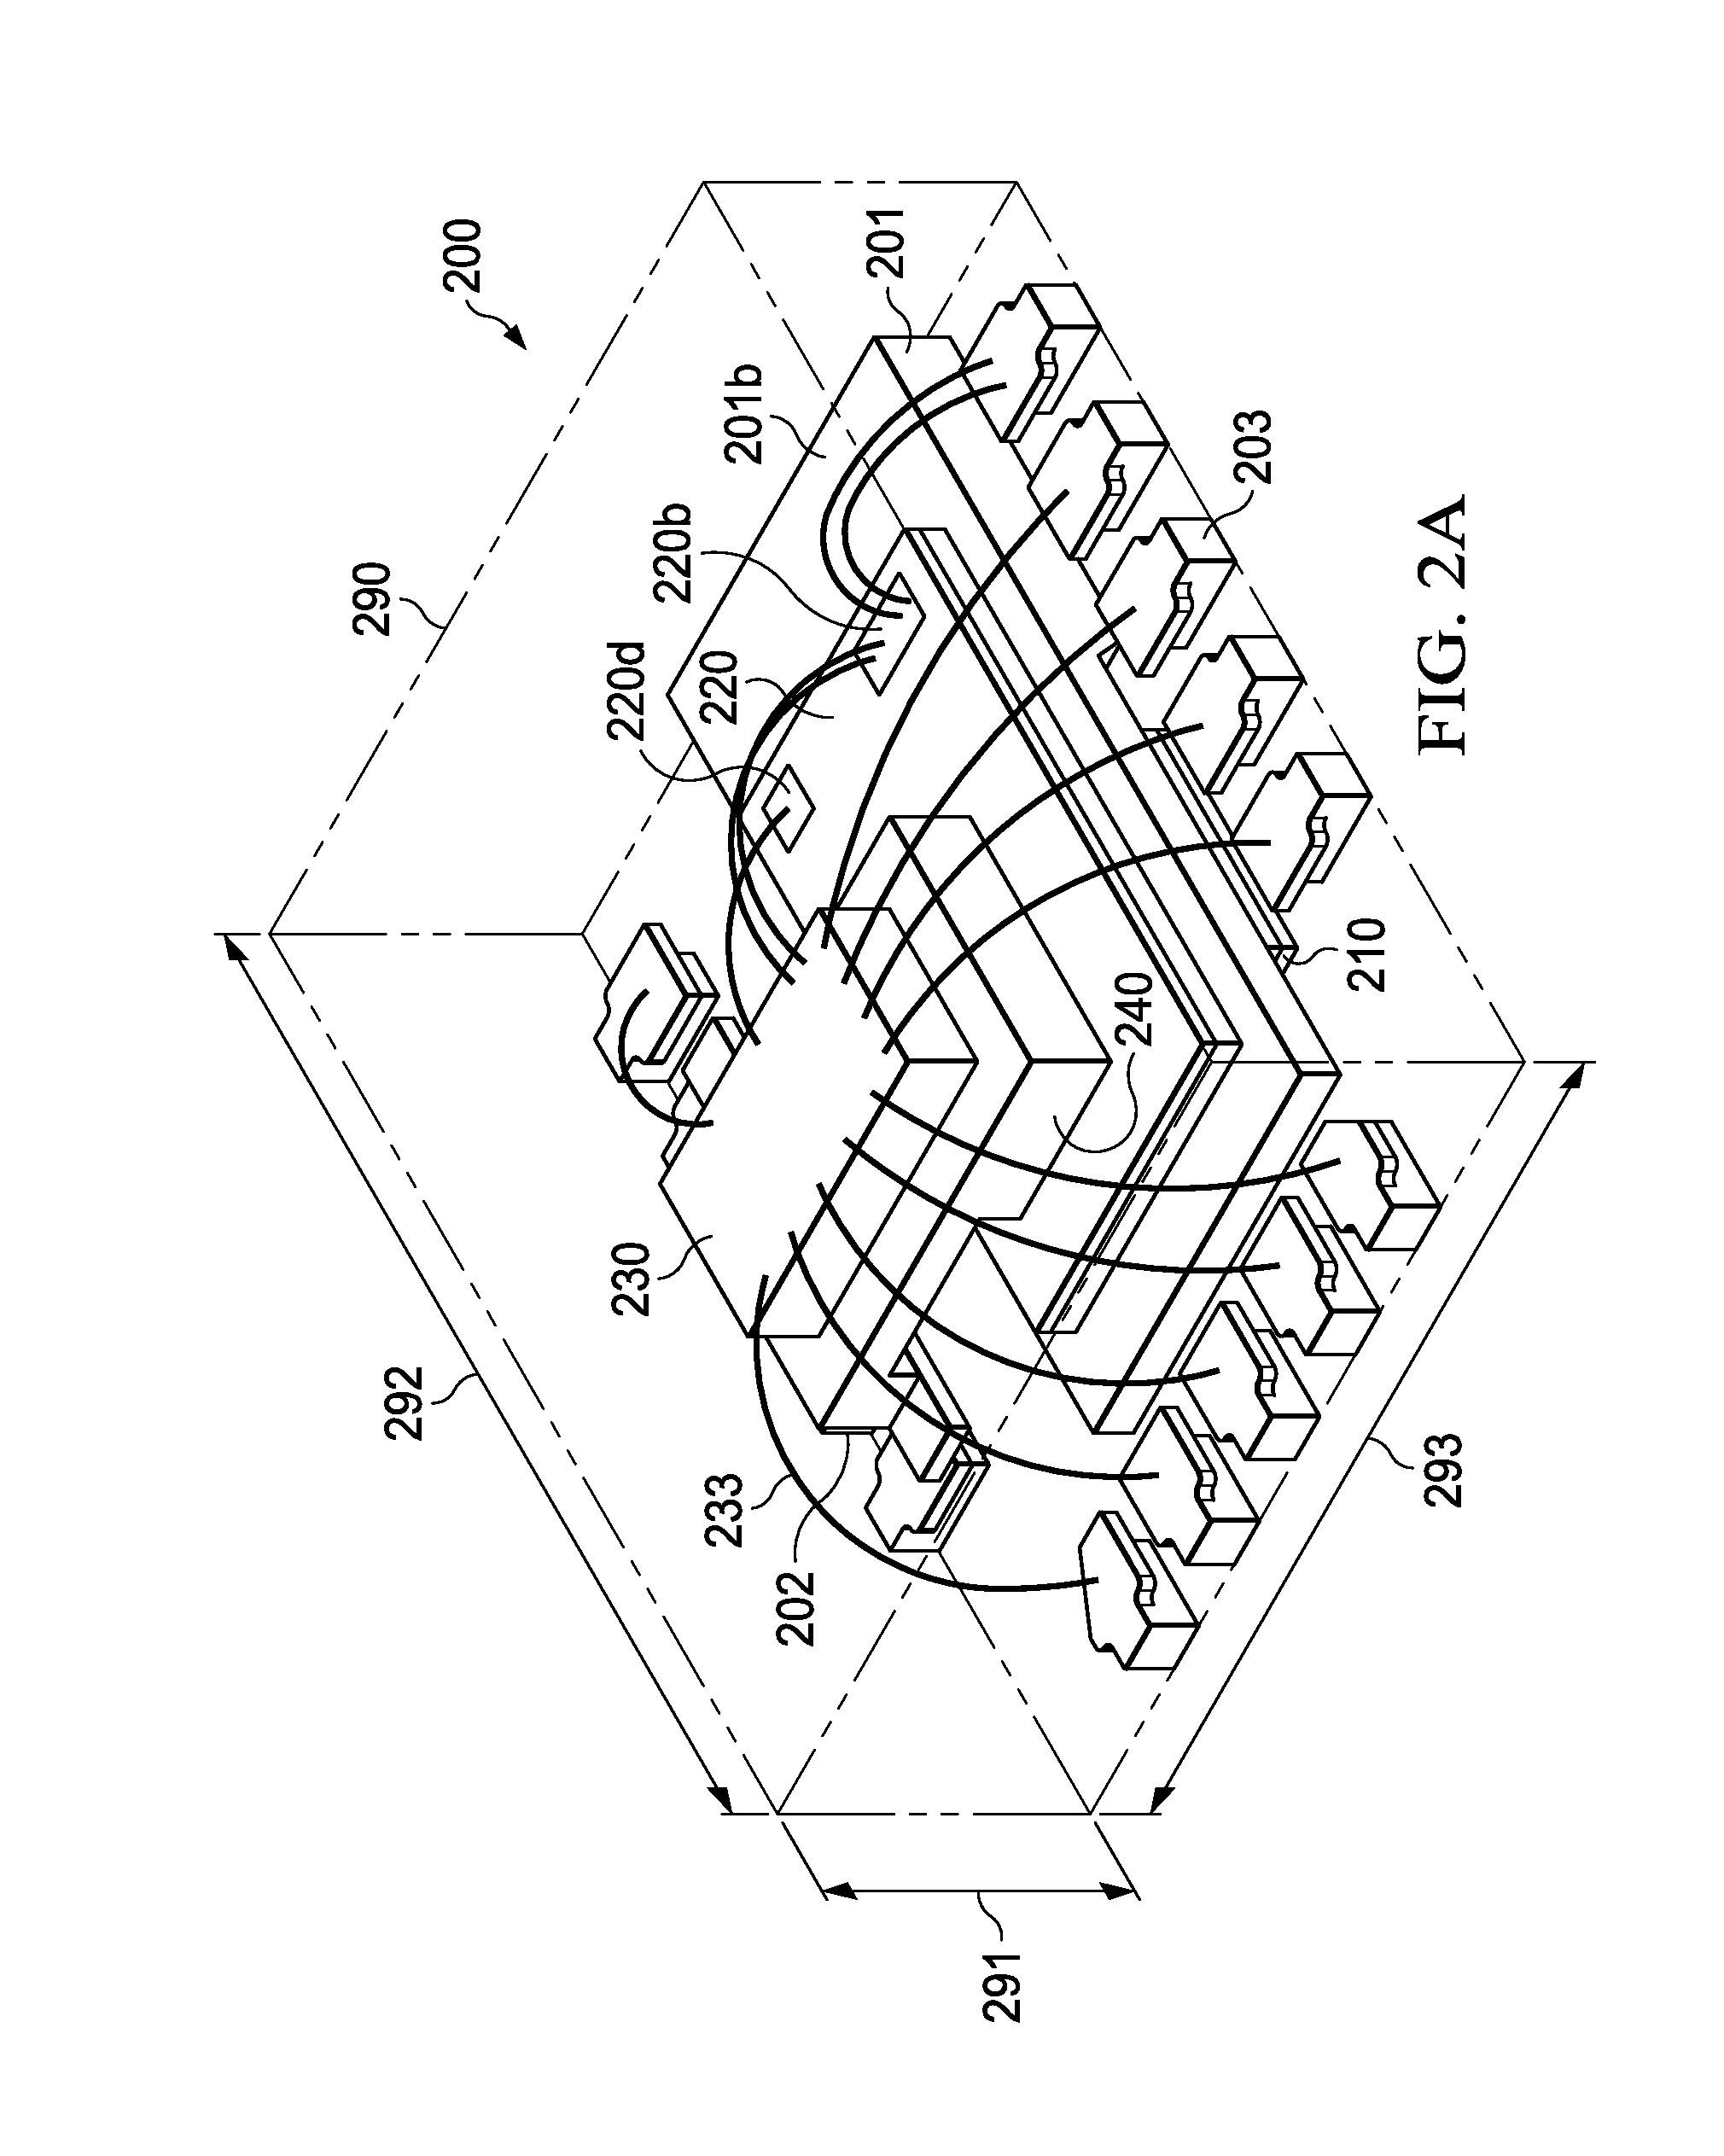 Stacked Synchronous Buck Converter Having Chip Embedded in Outside Recess of Leadframe